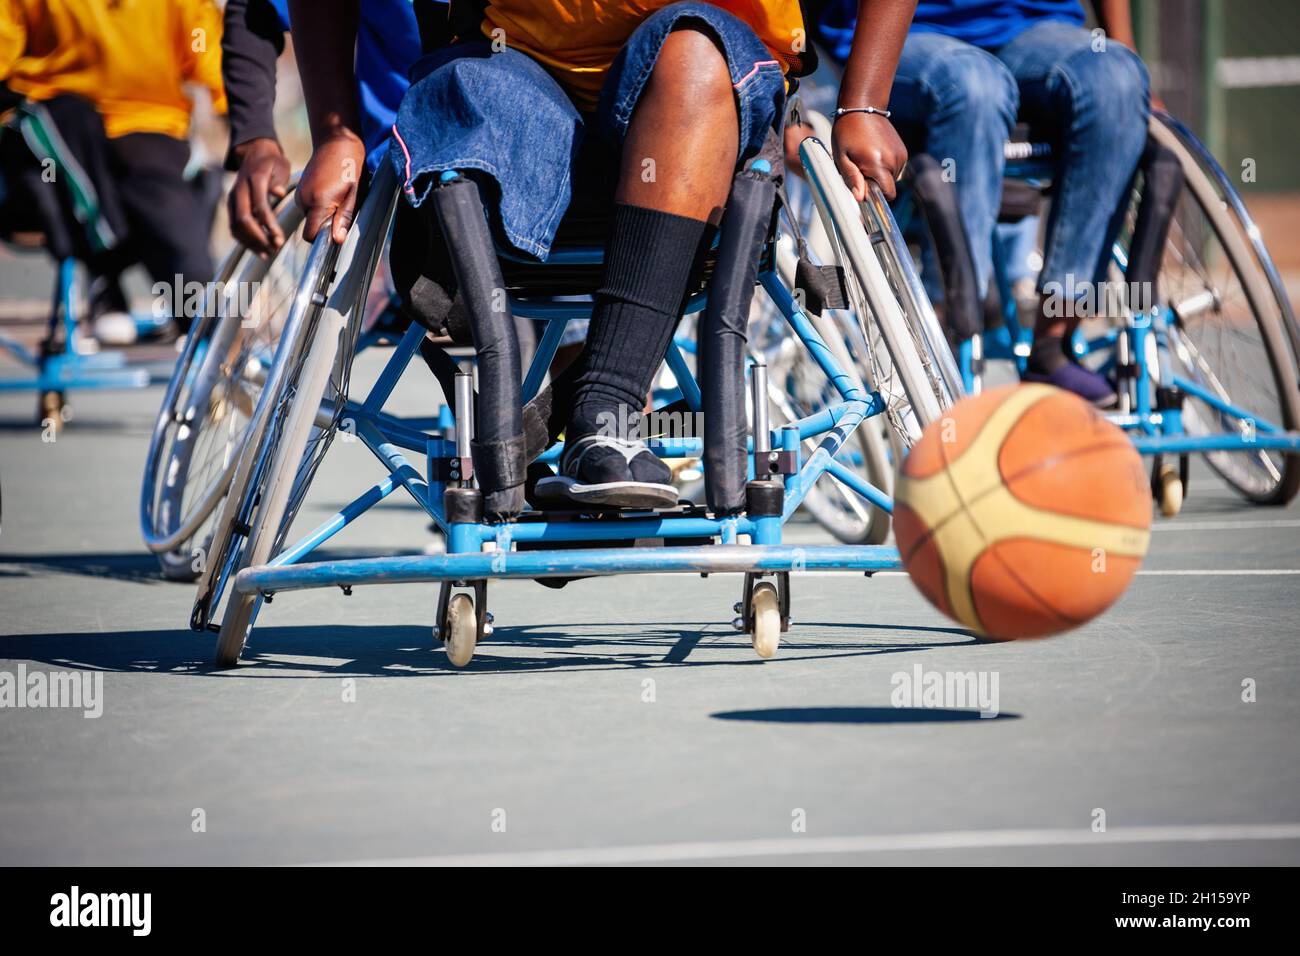 Paraplegic games, African Paralympics, basketball players chasing the ball in wheelchairs Stock Photo